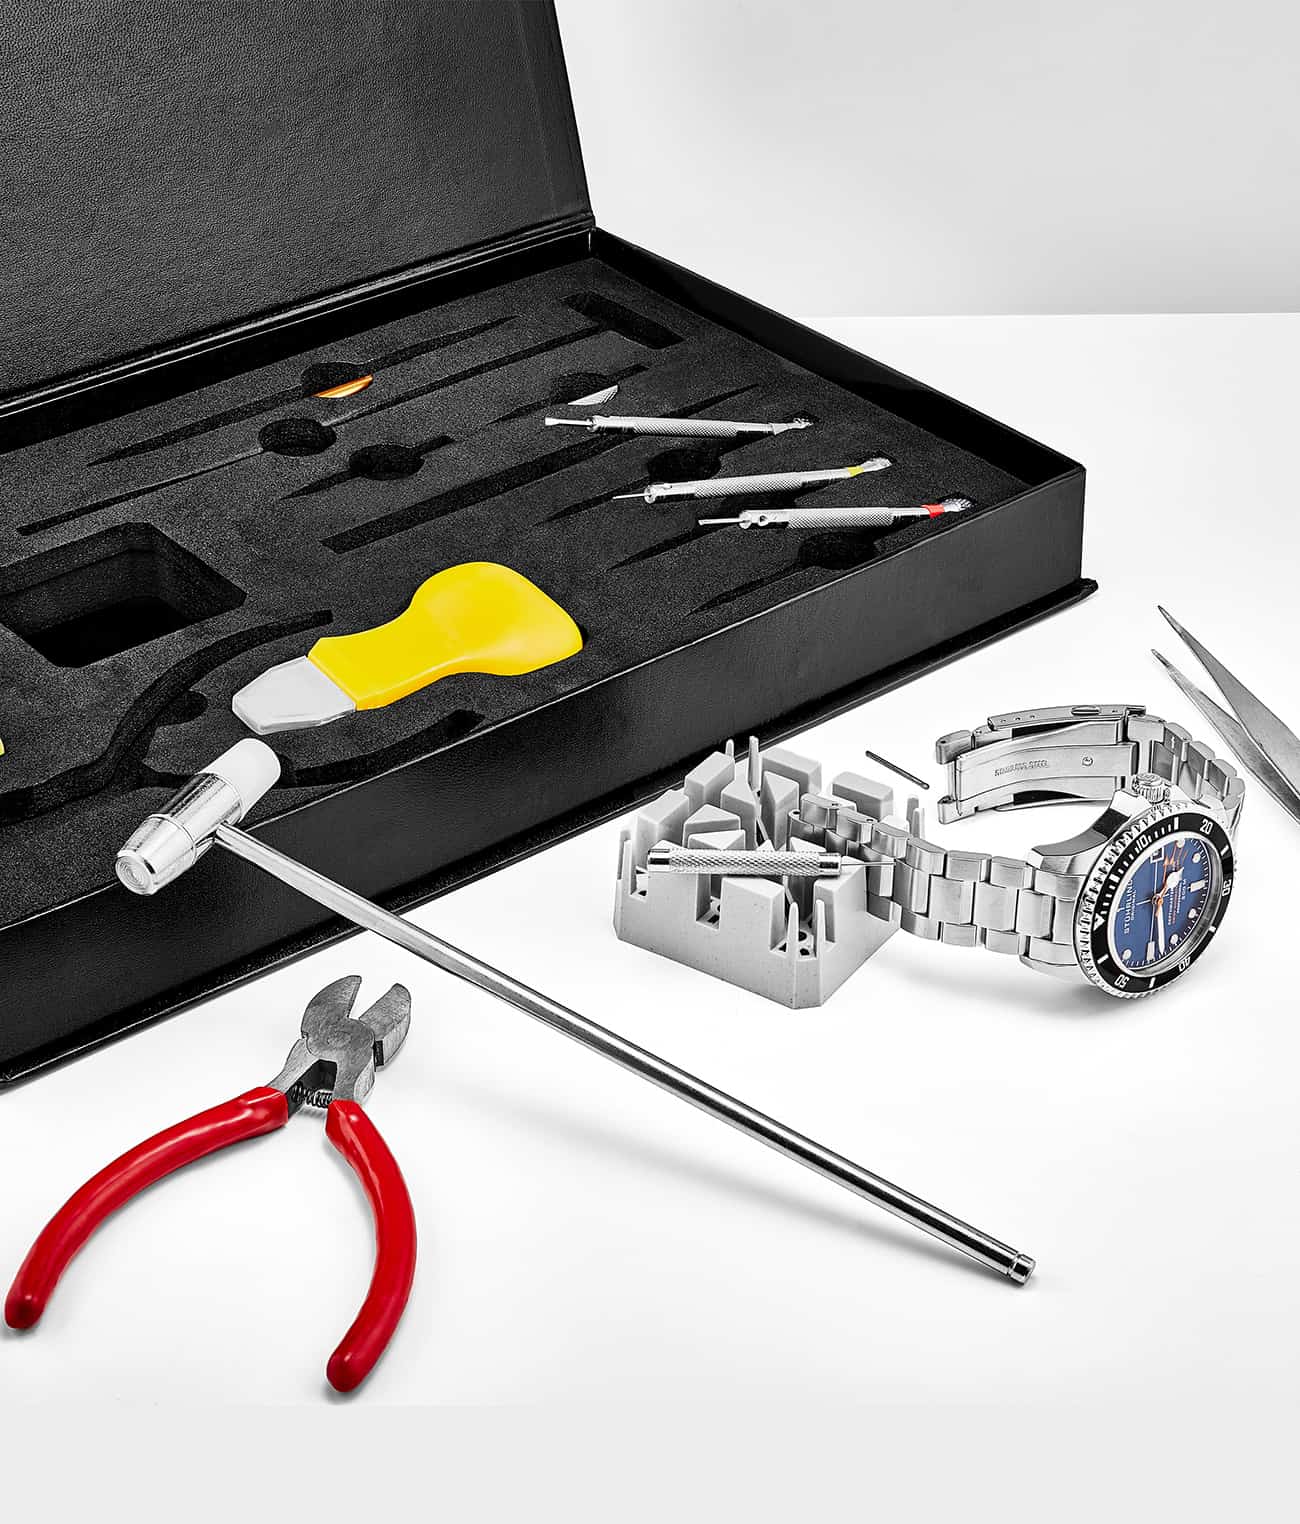 Meridian 3968.1, lineage 3935.2, Signature Pen, and Watch Tool Kit